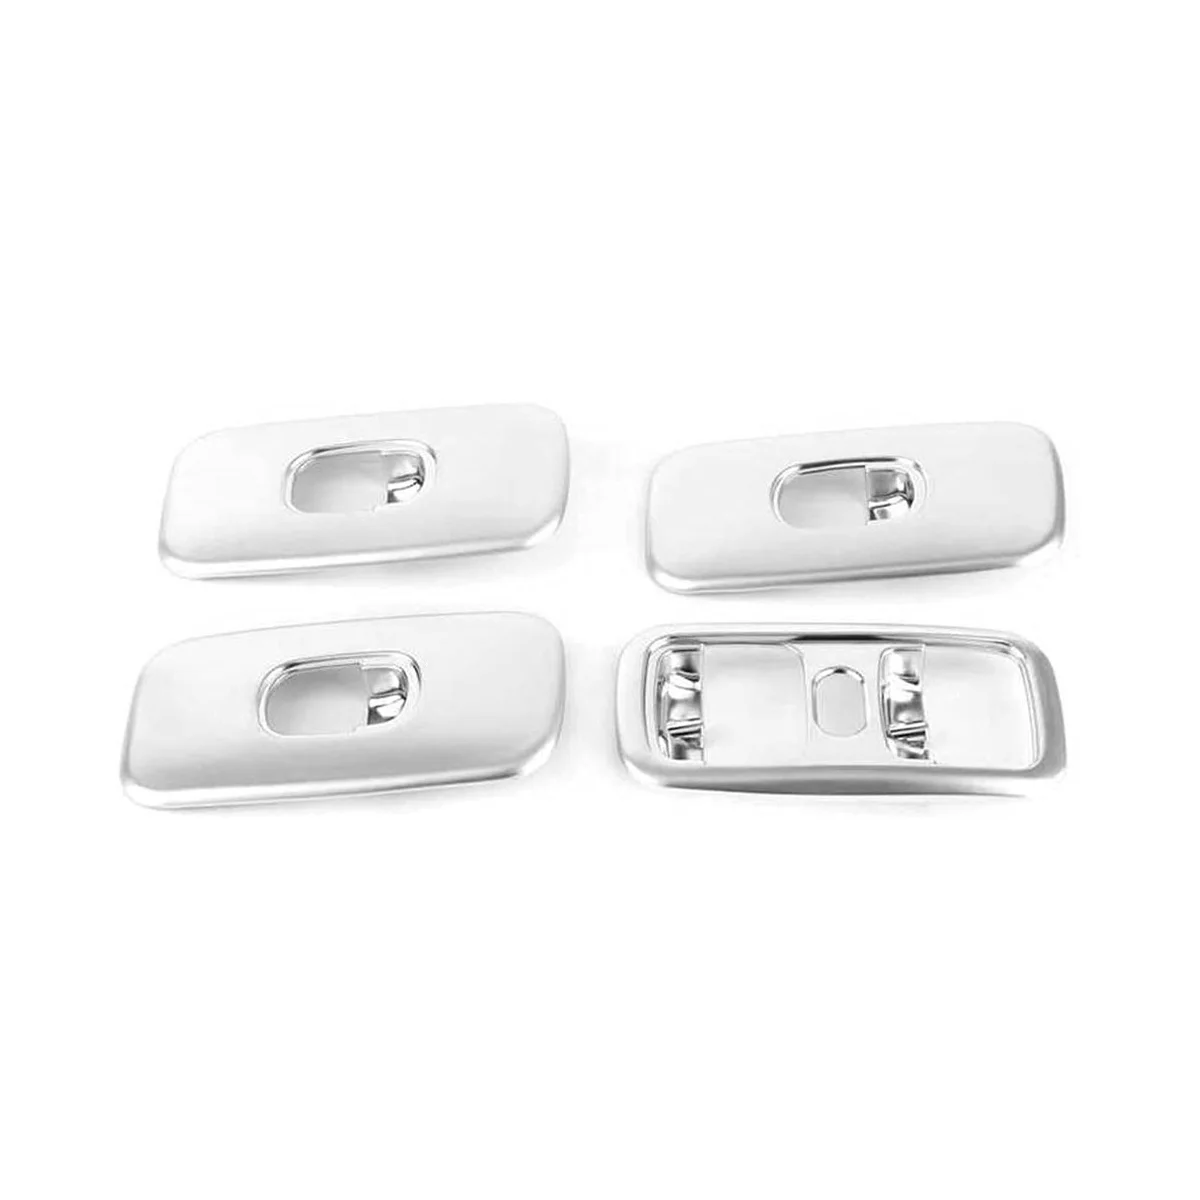 

4Pcs Silver Window Lift Switch Cover Decoration Trim for Mercedes Benz G Class W463 G500 2007-2010